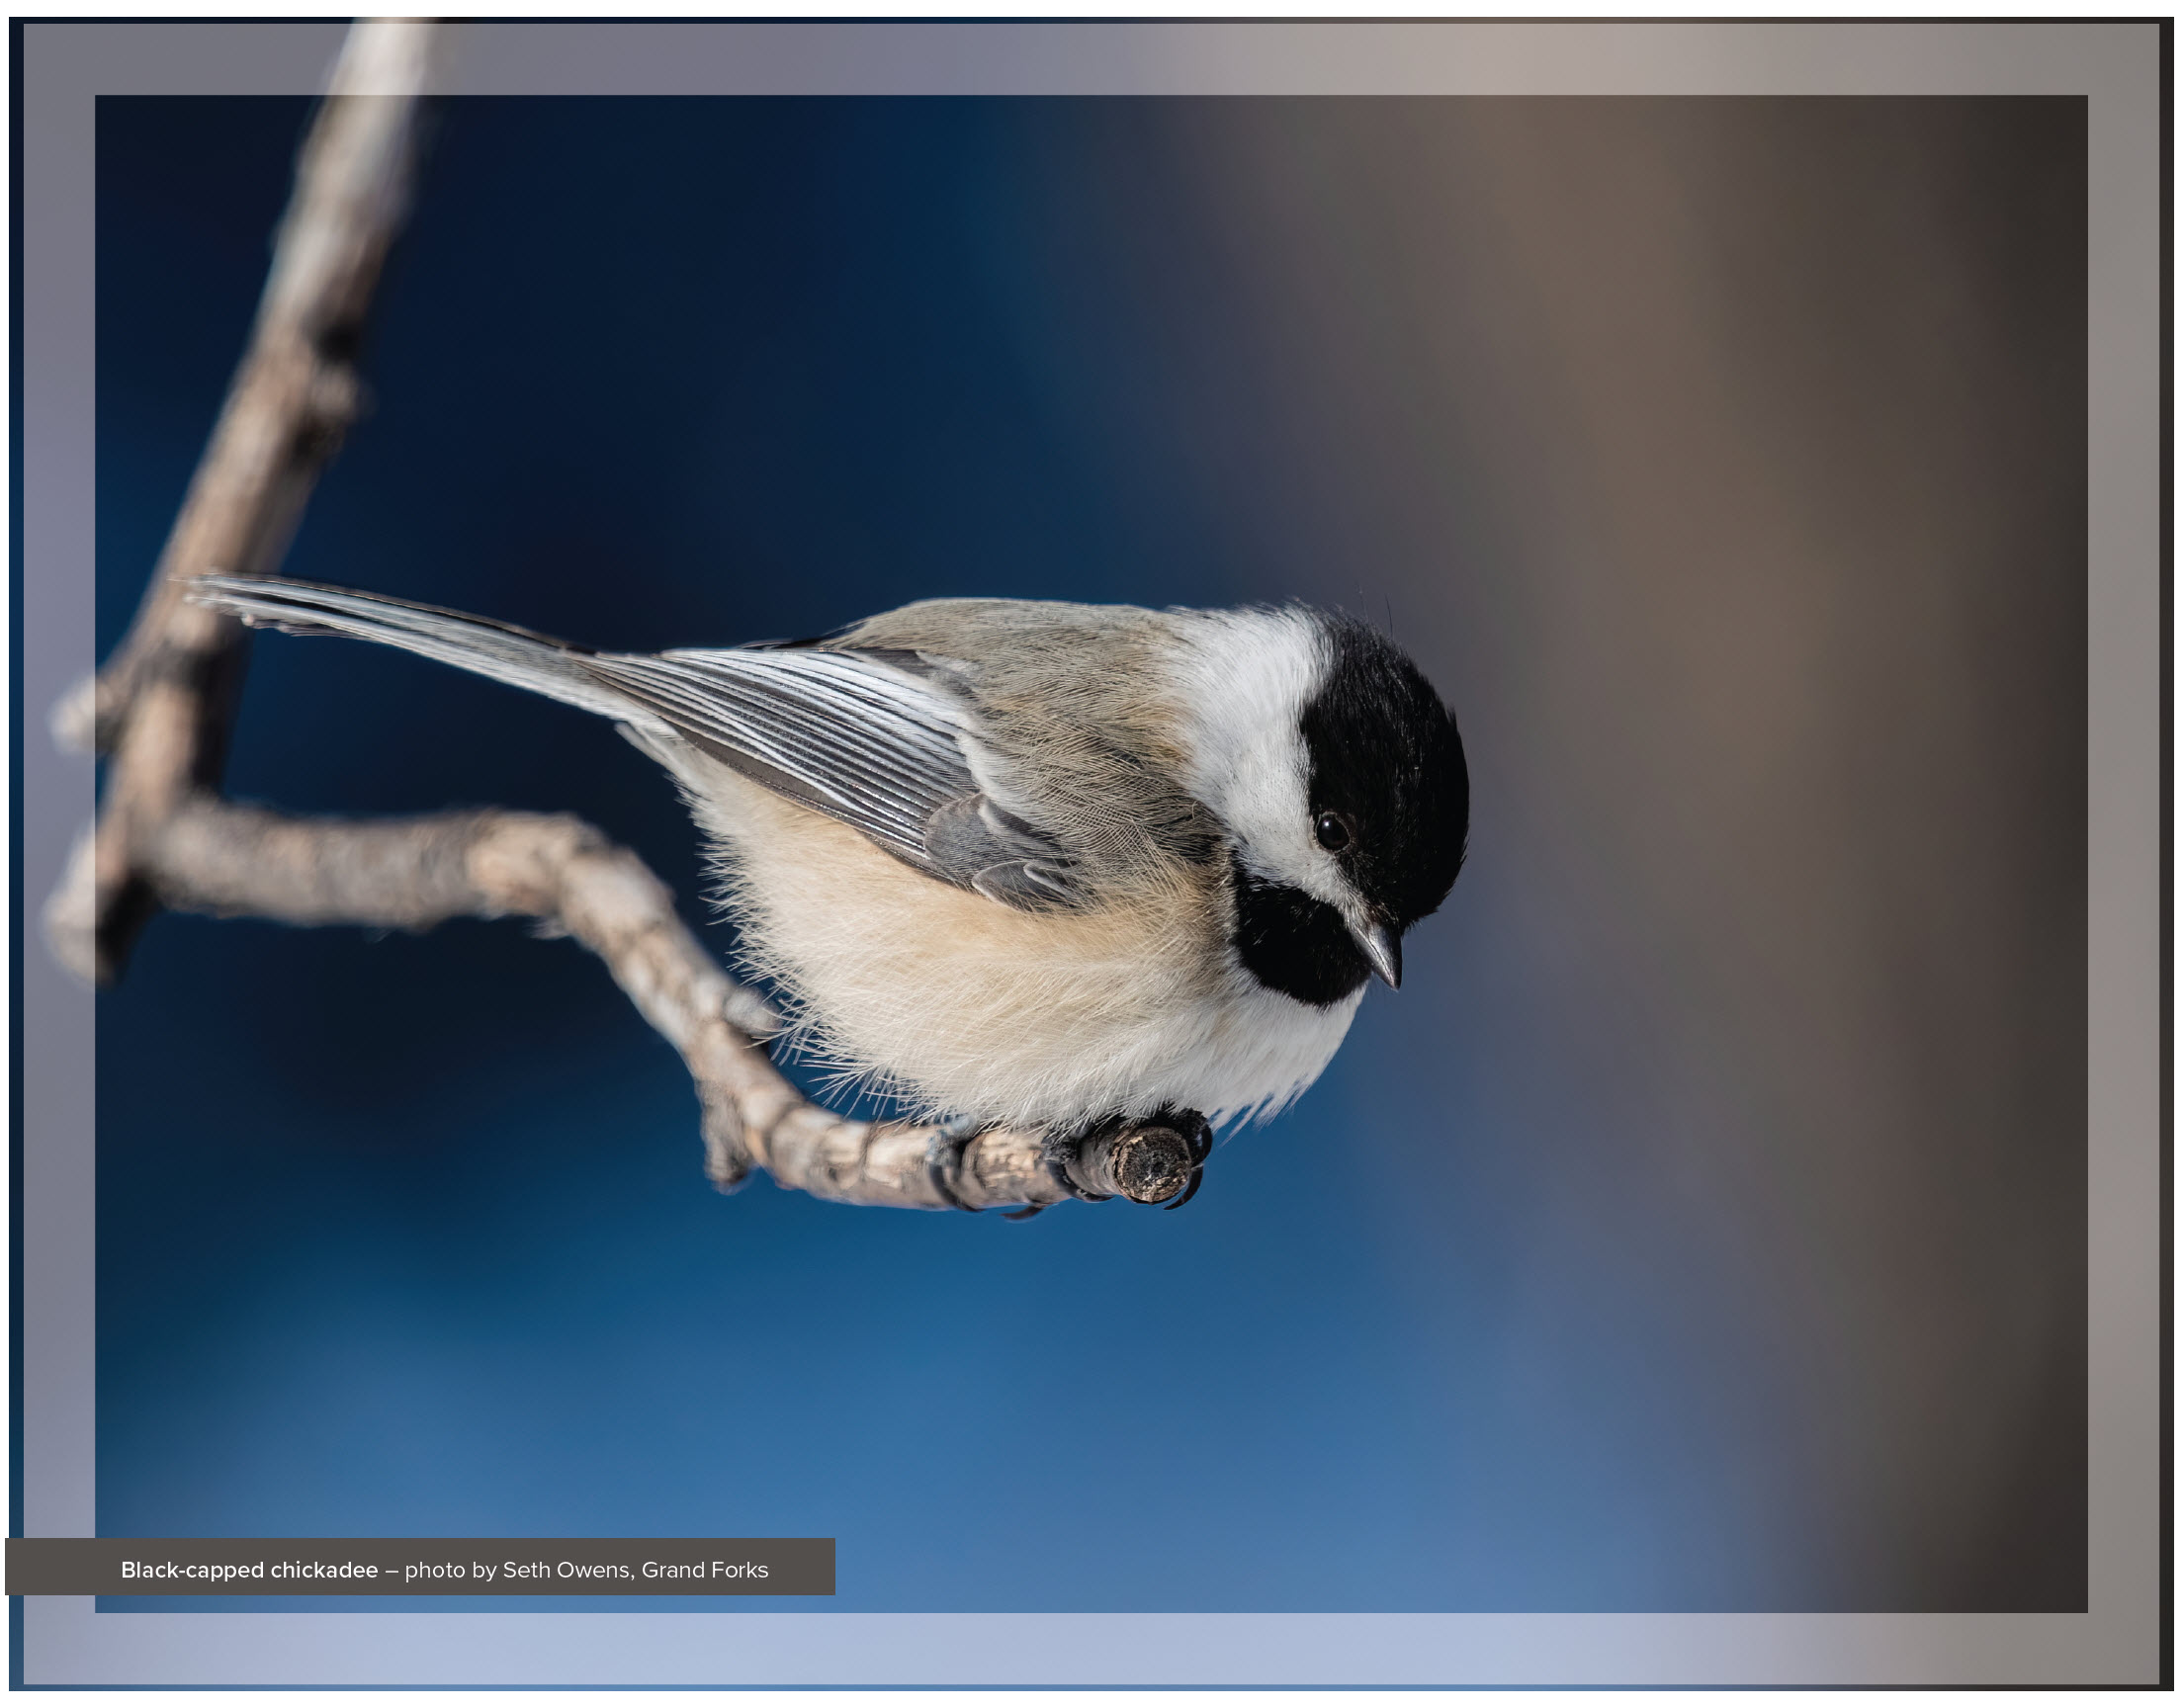 Black-capped chickadee taken by Seth Owens